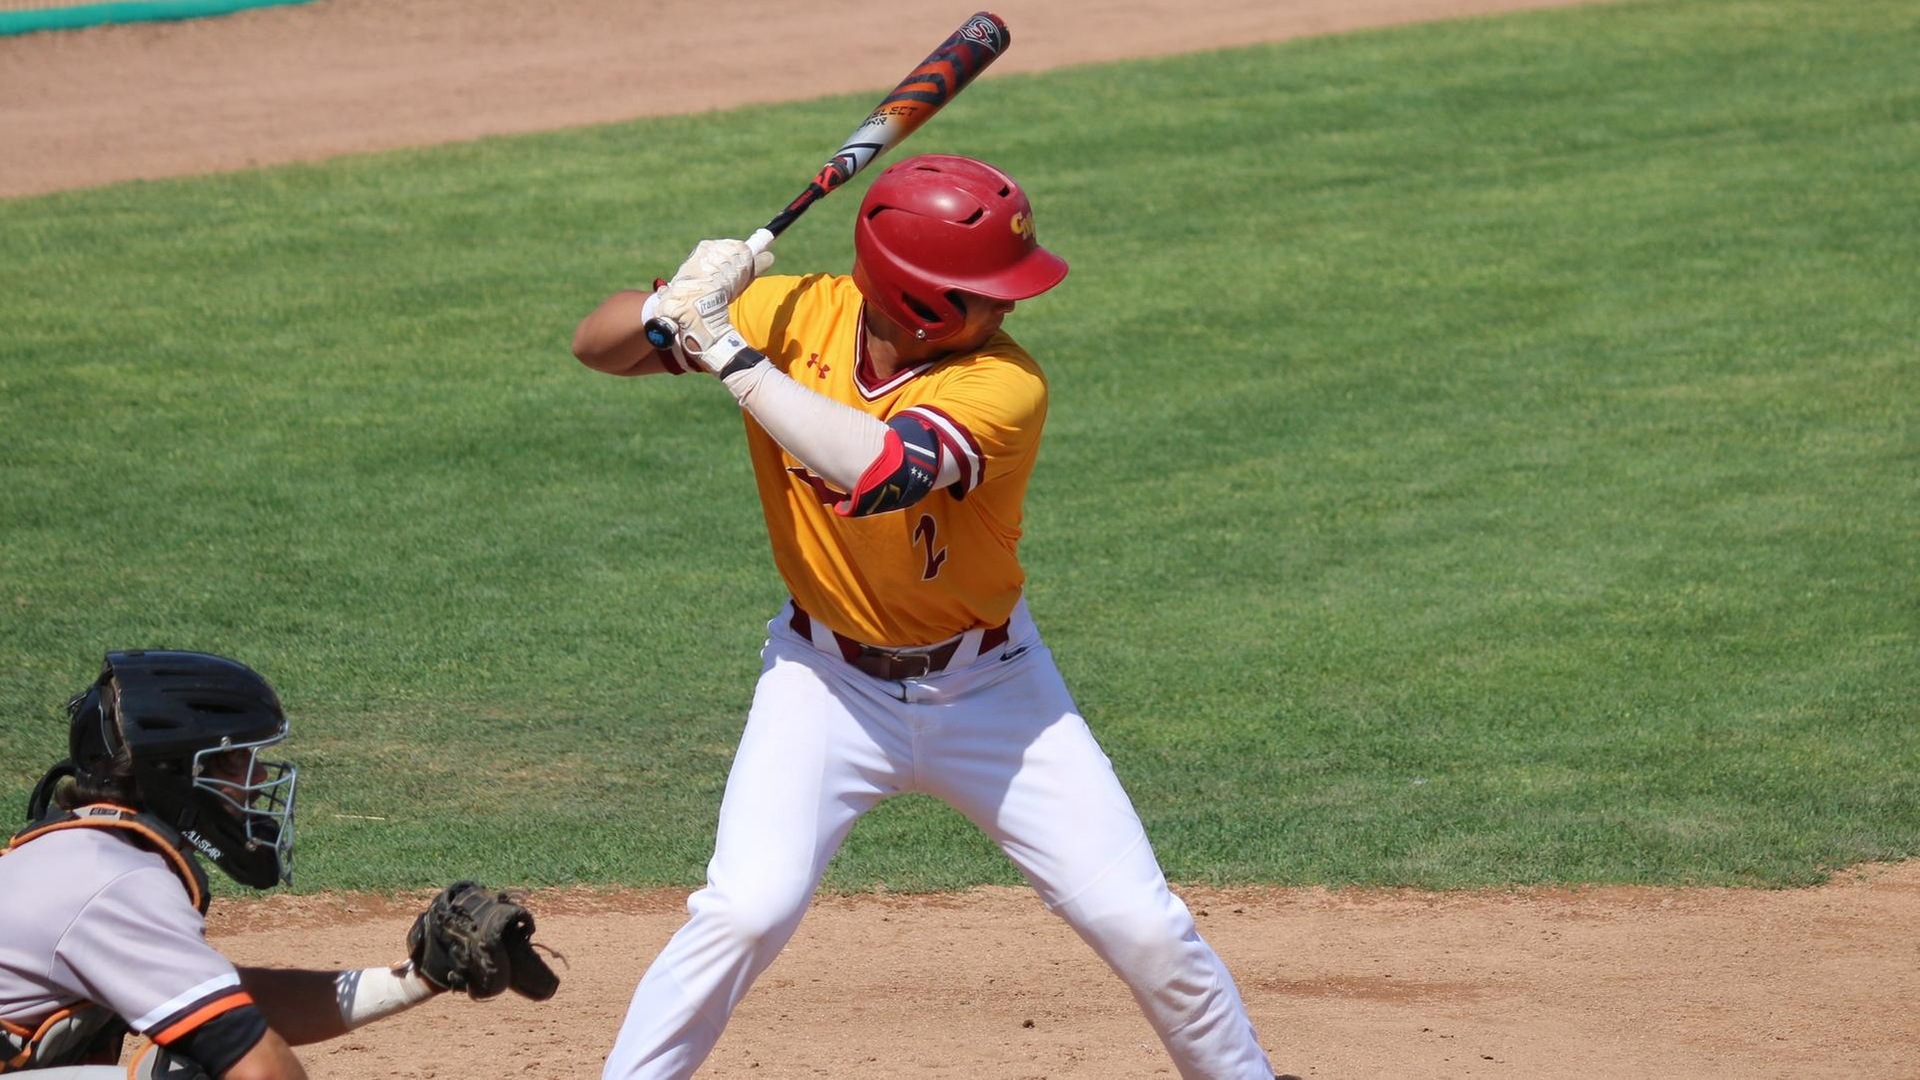 Nick Wilson was 1-for-3 with a sac fly for the Stags